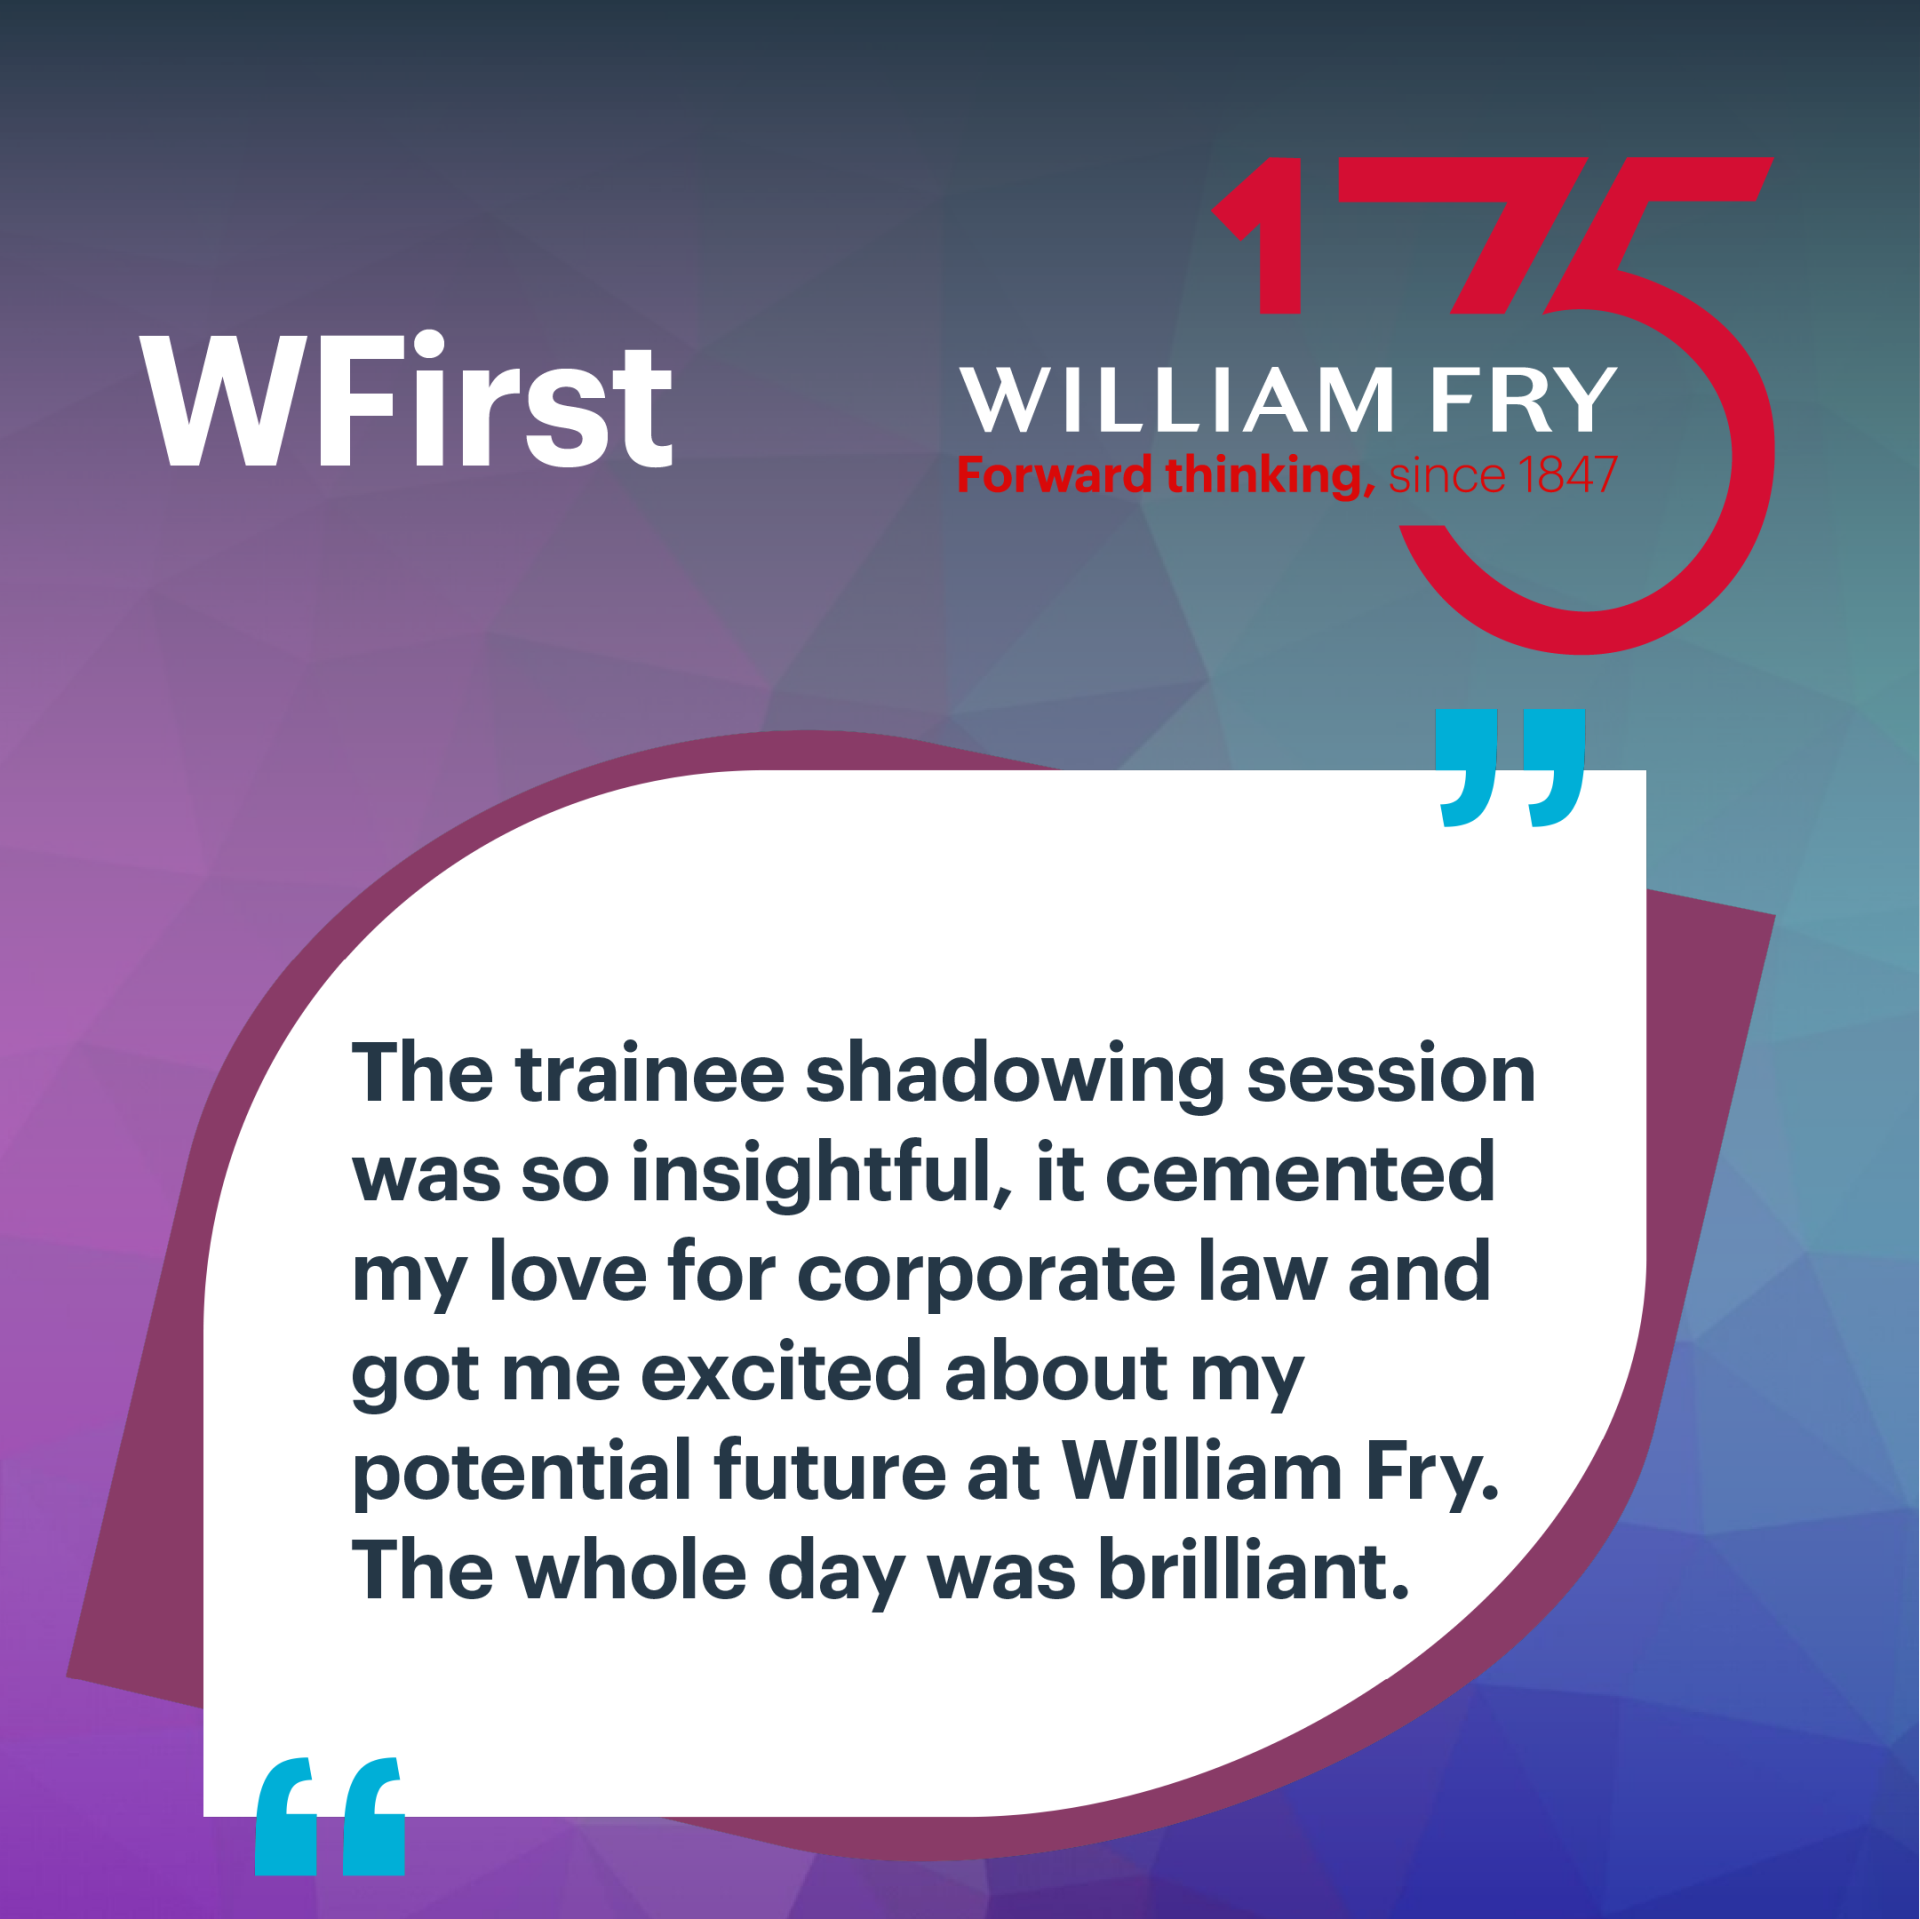 WFirst Insight Day